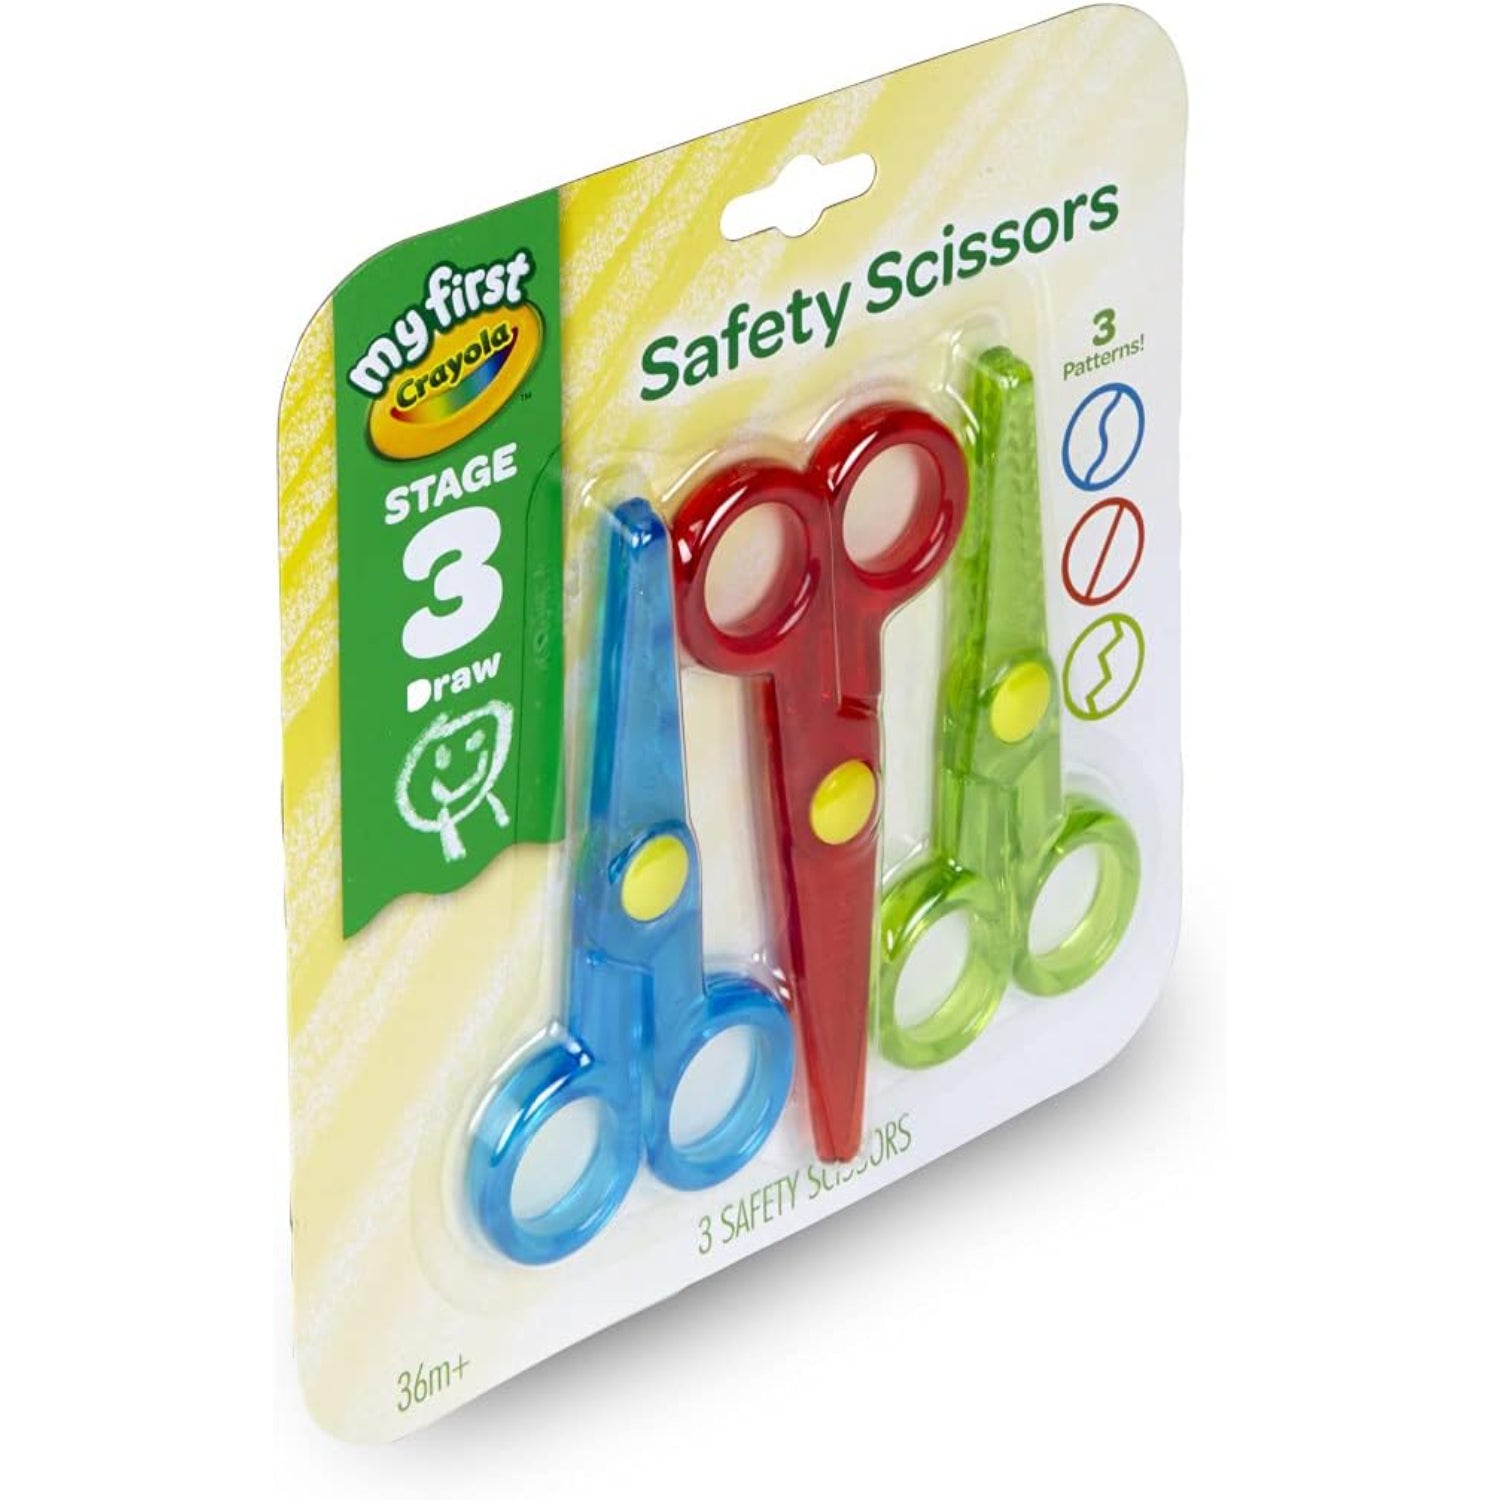  Training Scissors for Kids, Preschool Children Safety Scissors  Set - Safe Round Blunt Tip - Perfect for Developing Cutting Skills for Arts  & Crafts and School - Assorted Colors 